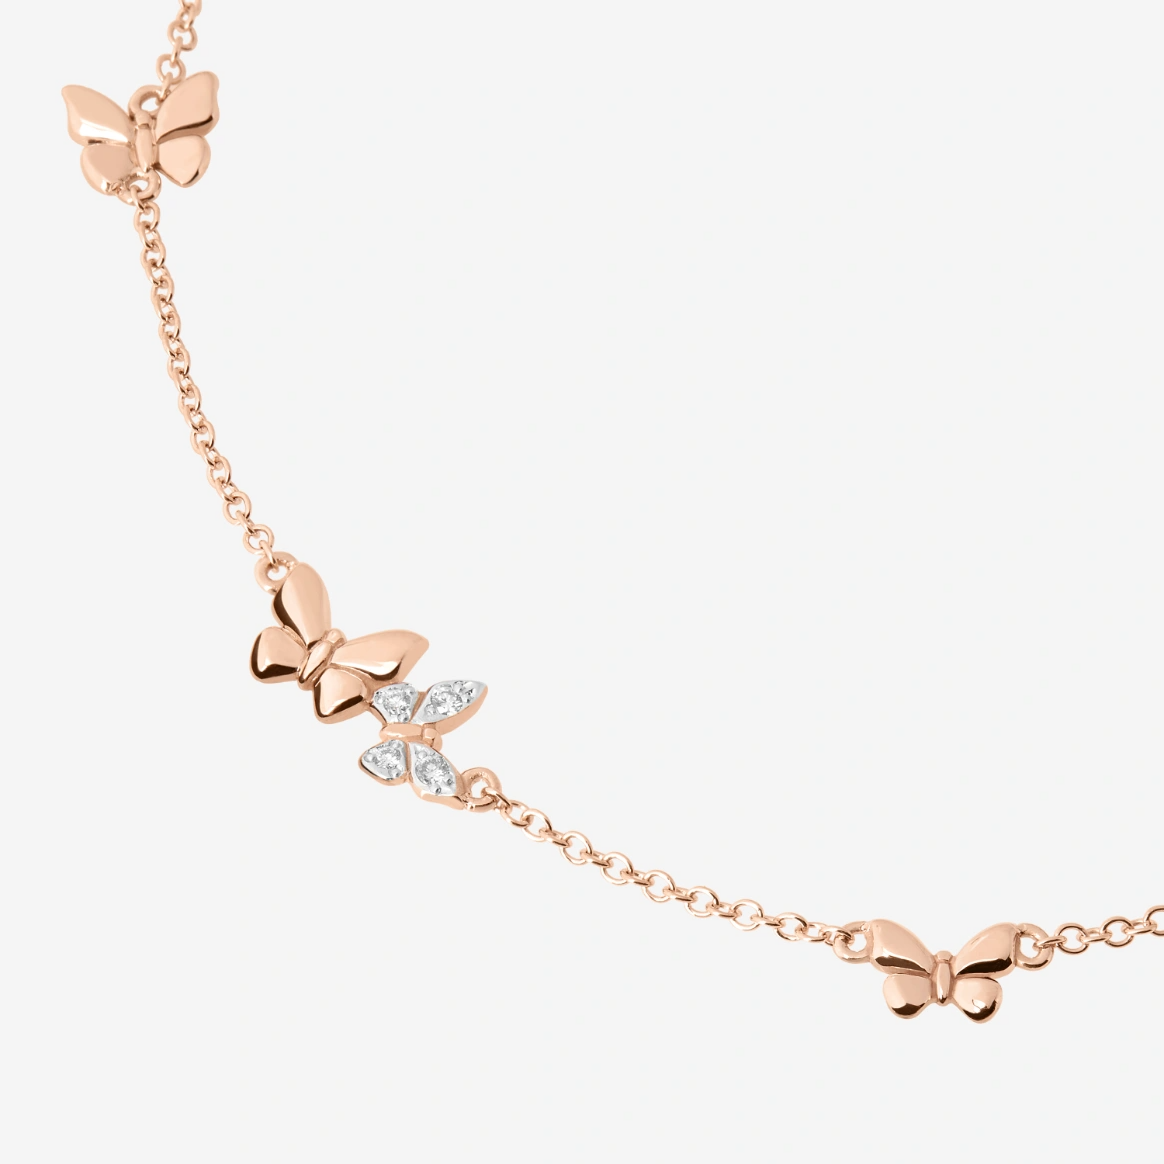 Dodo Butterfly Necklace in 9k Rose Gold with Diamonds and Blue Sapphires - Orsini Jewellers